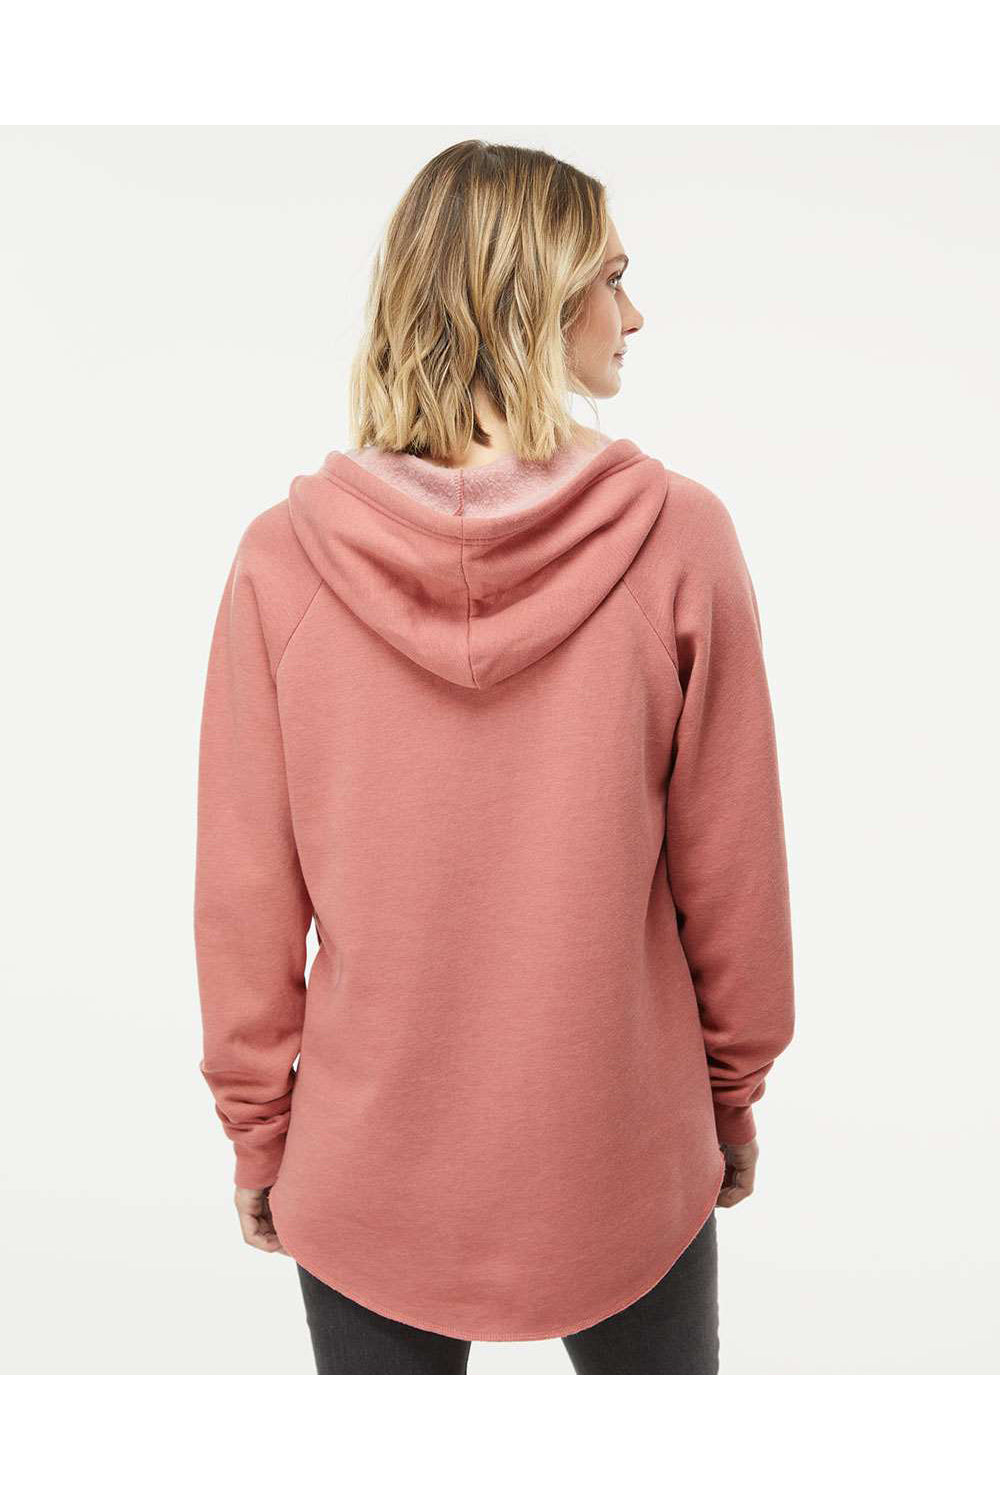 Independent Trading Co. PRM2500 Womens California Wave Wash Hooded Sweatshirt Hoodie Dusty Rose Model Back